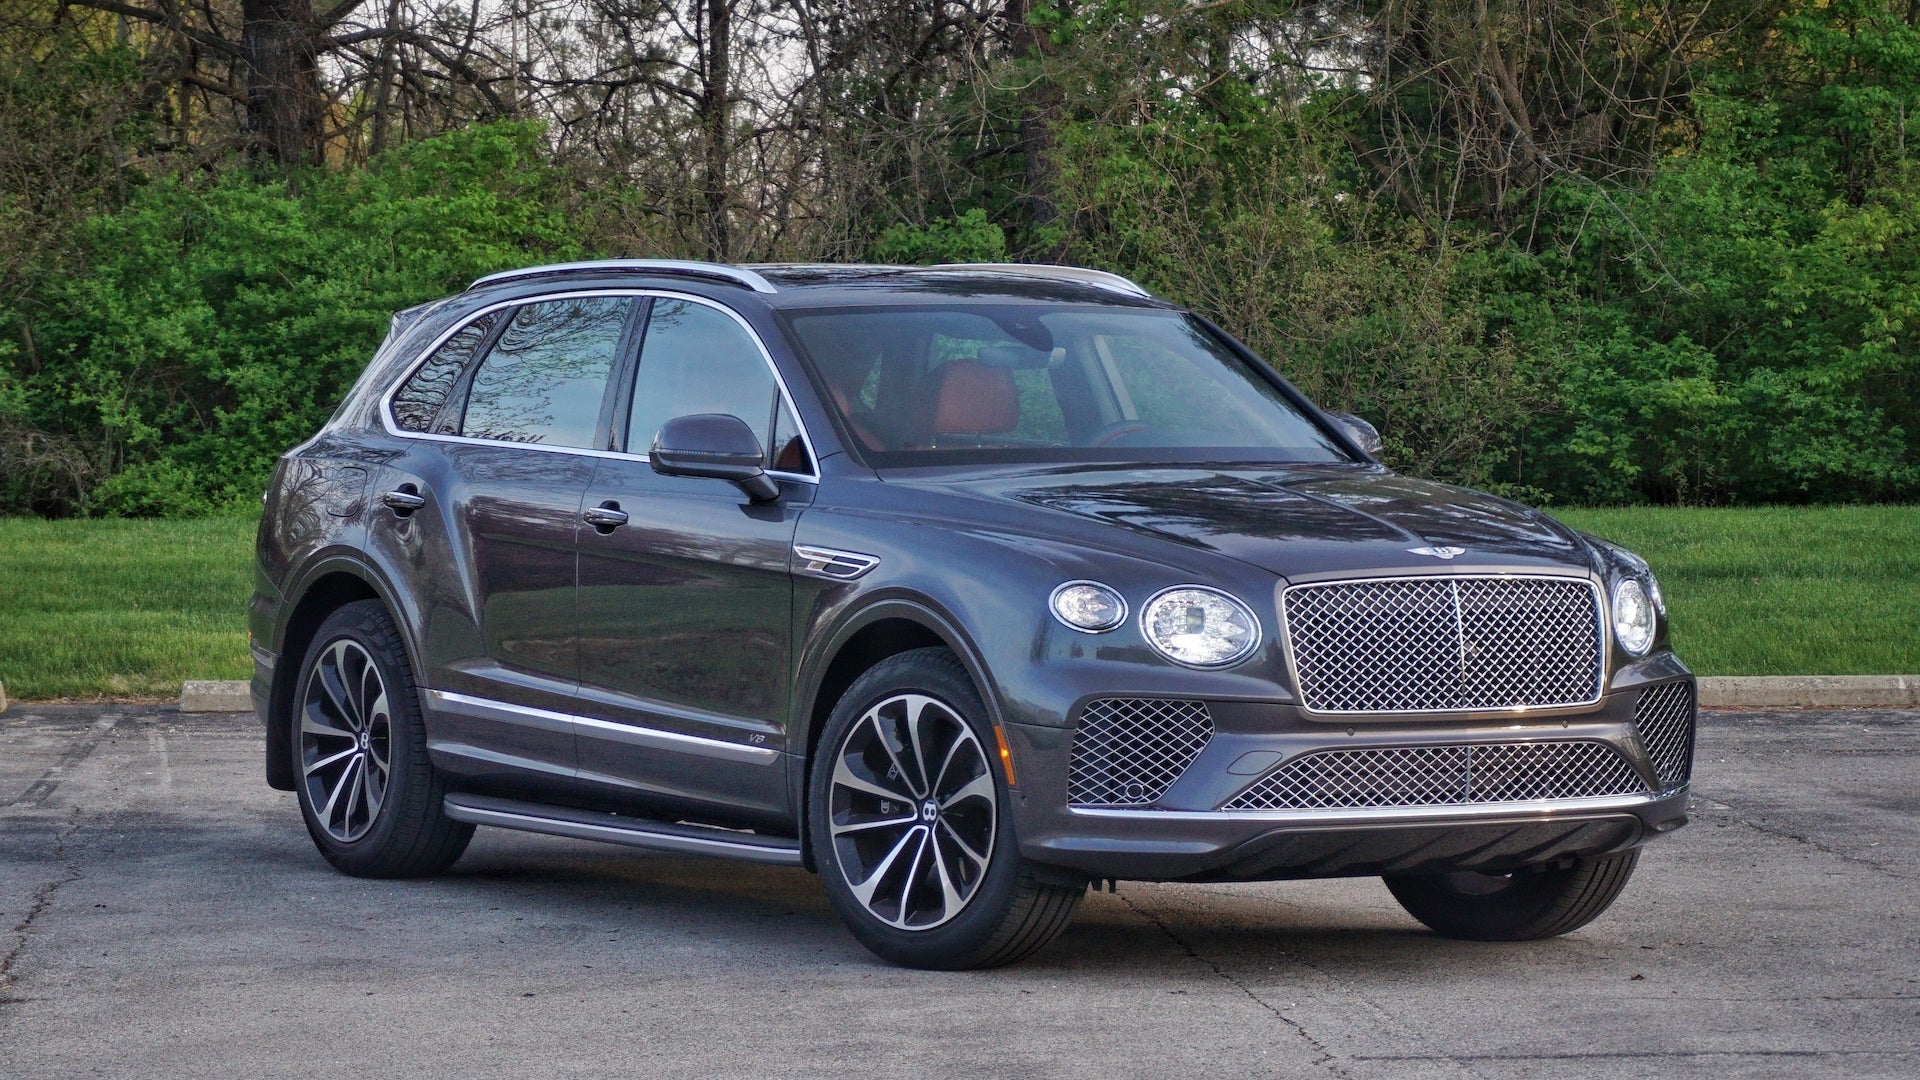 Silicon dug Muskuløs 2021 Bentley Bentayga Review: Opulent Doesn't Have to Mean Impractical